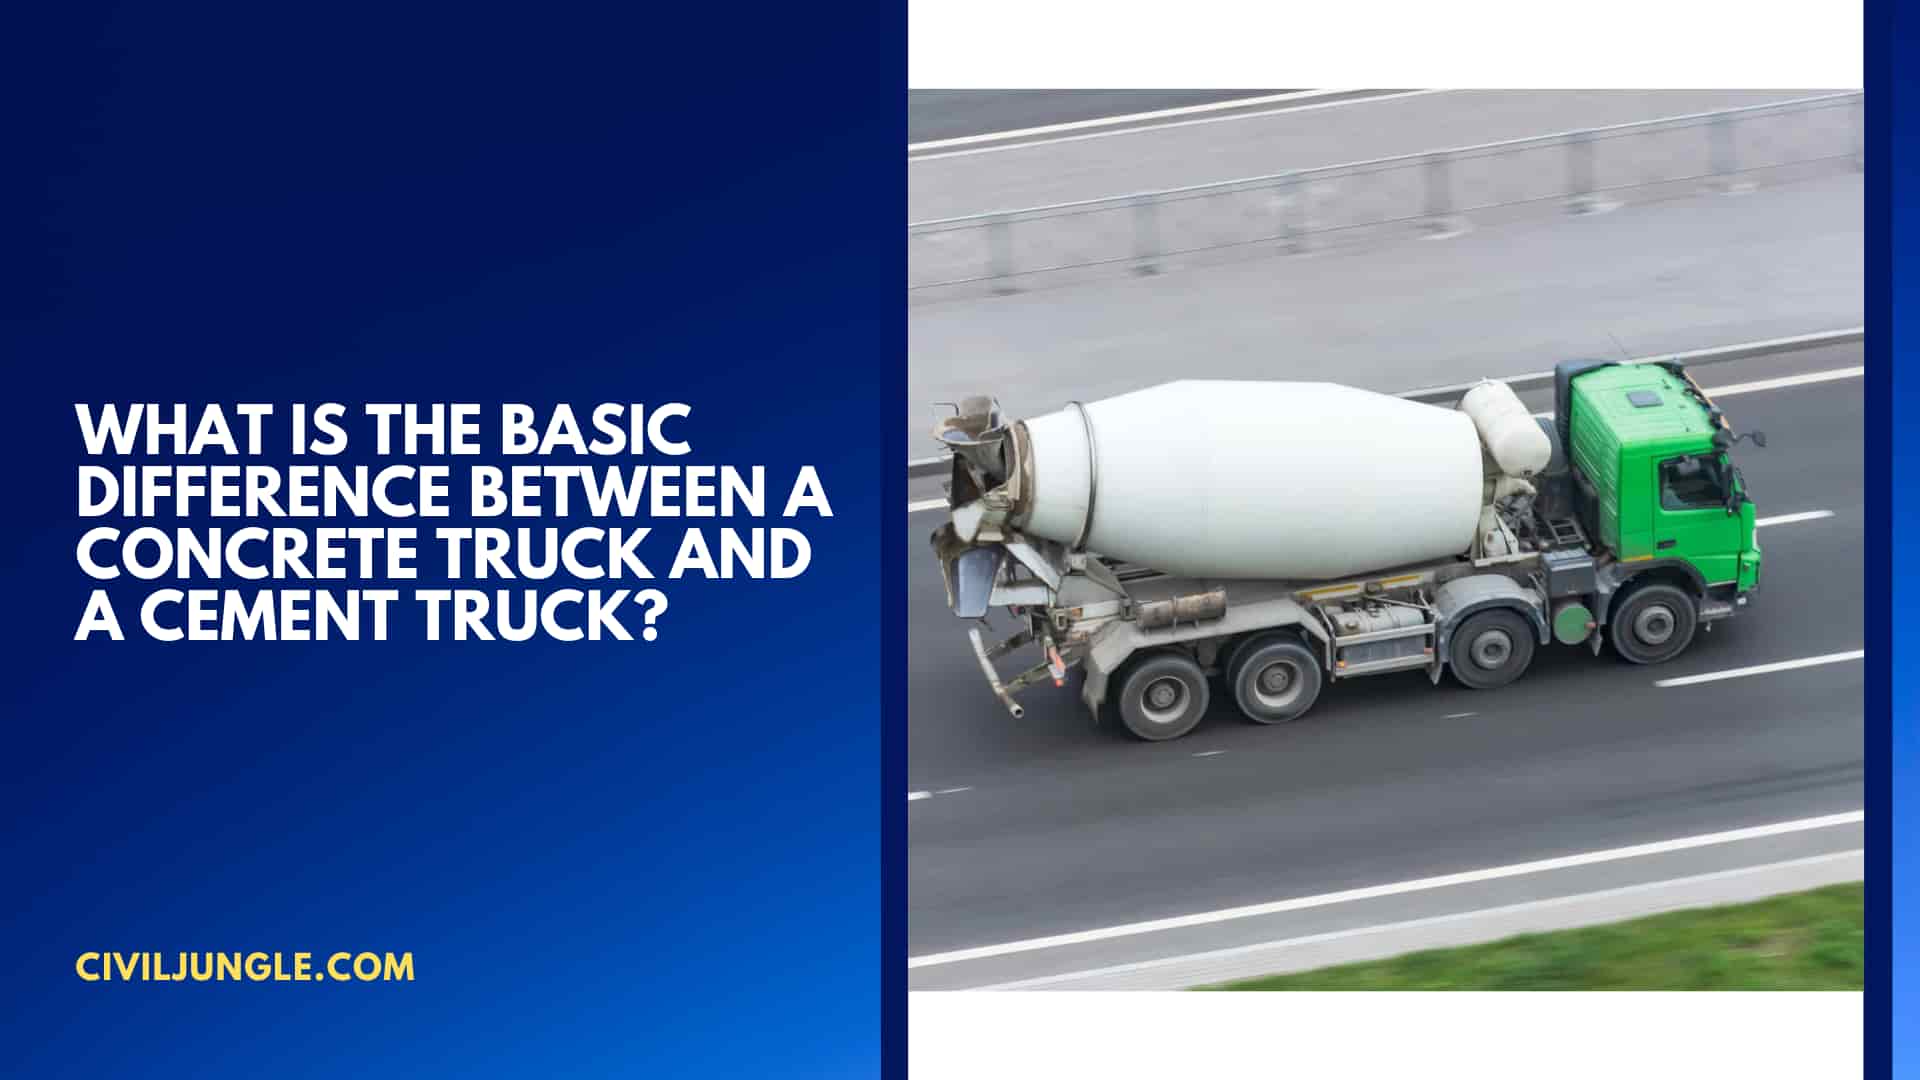 What is the Basic Difference Between a Concrete Truck and a Cement Truck?